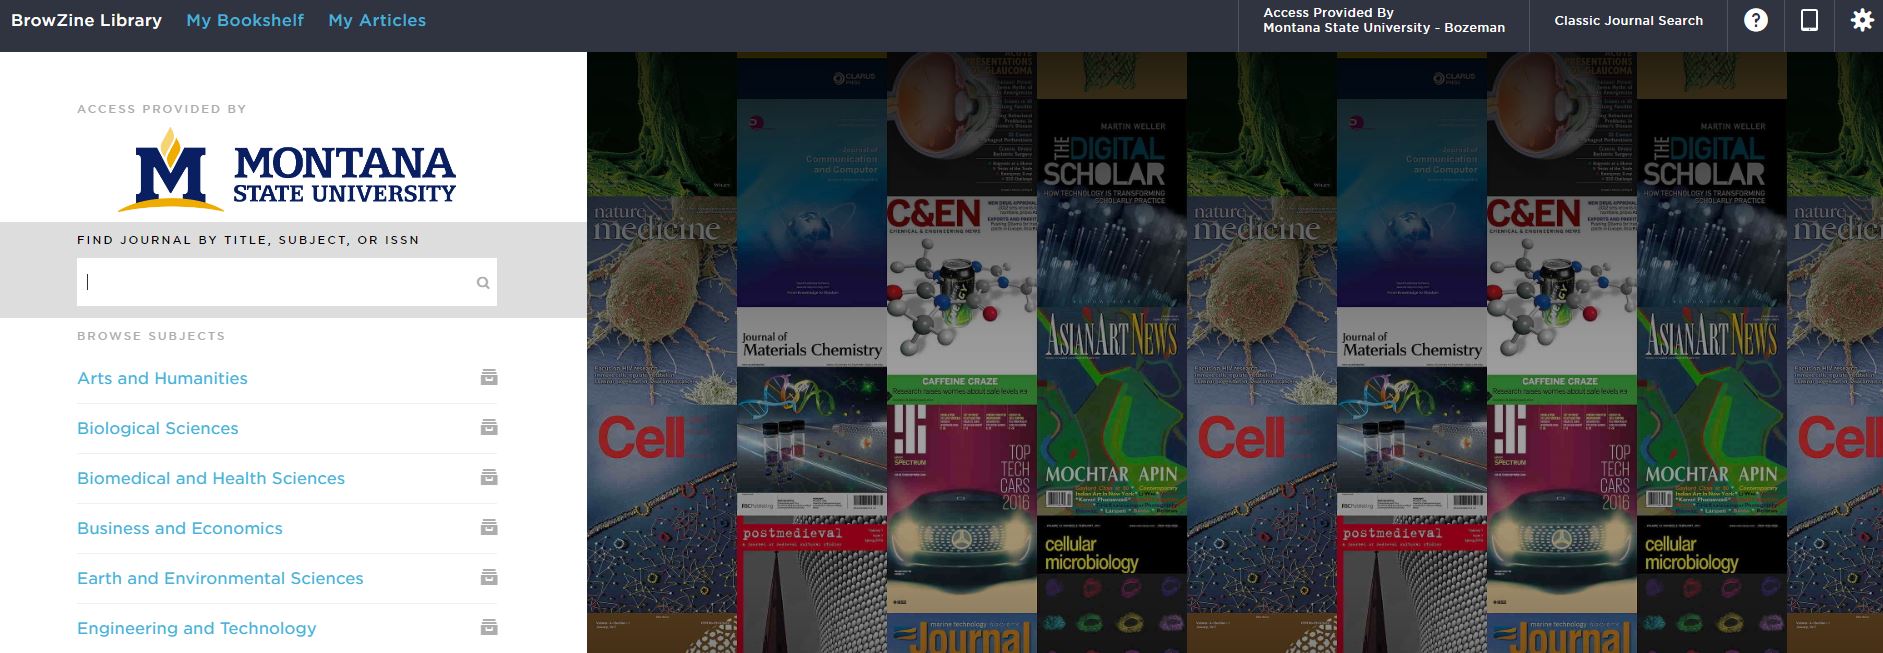 Screenshot of the BrowZine interface with the MSU Library logo, a collage of journal covers in the background.